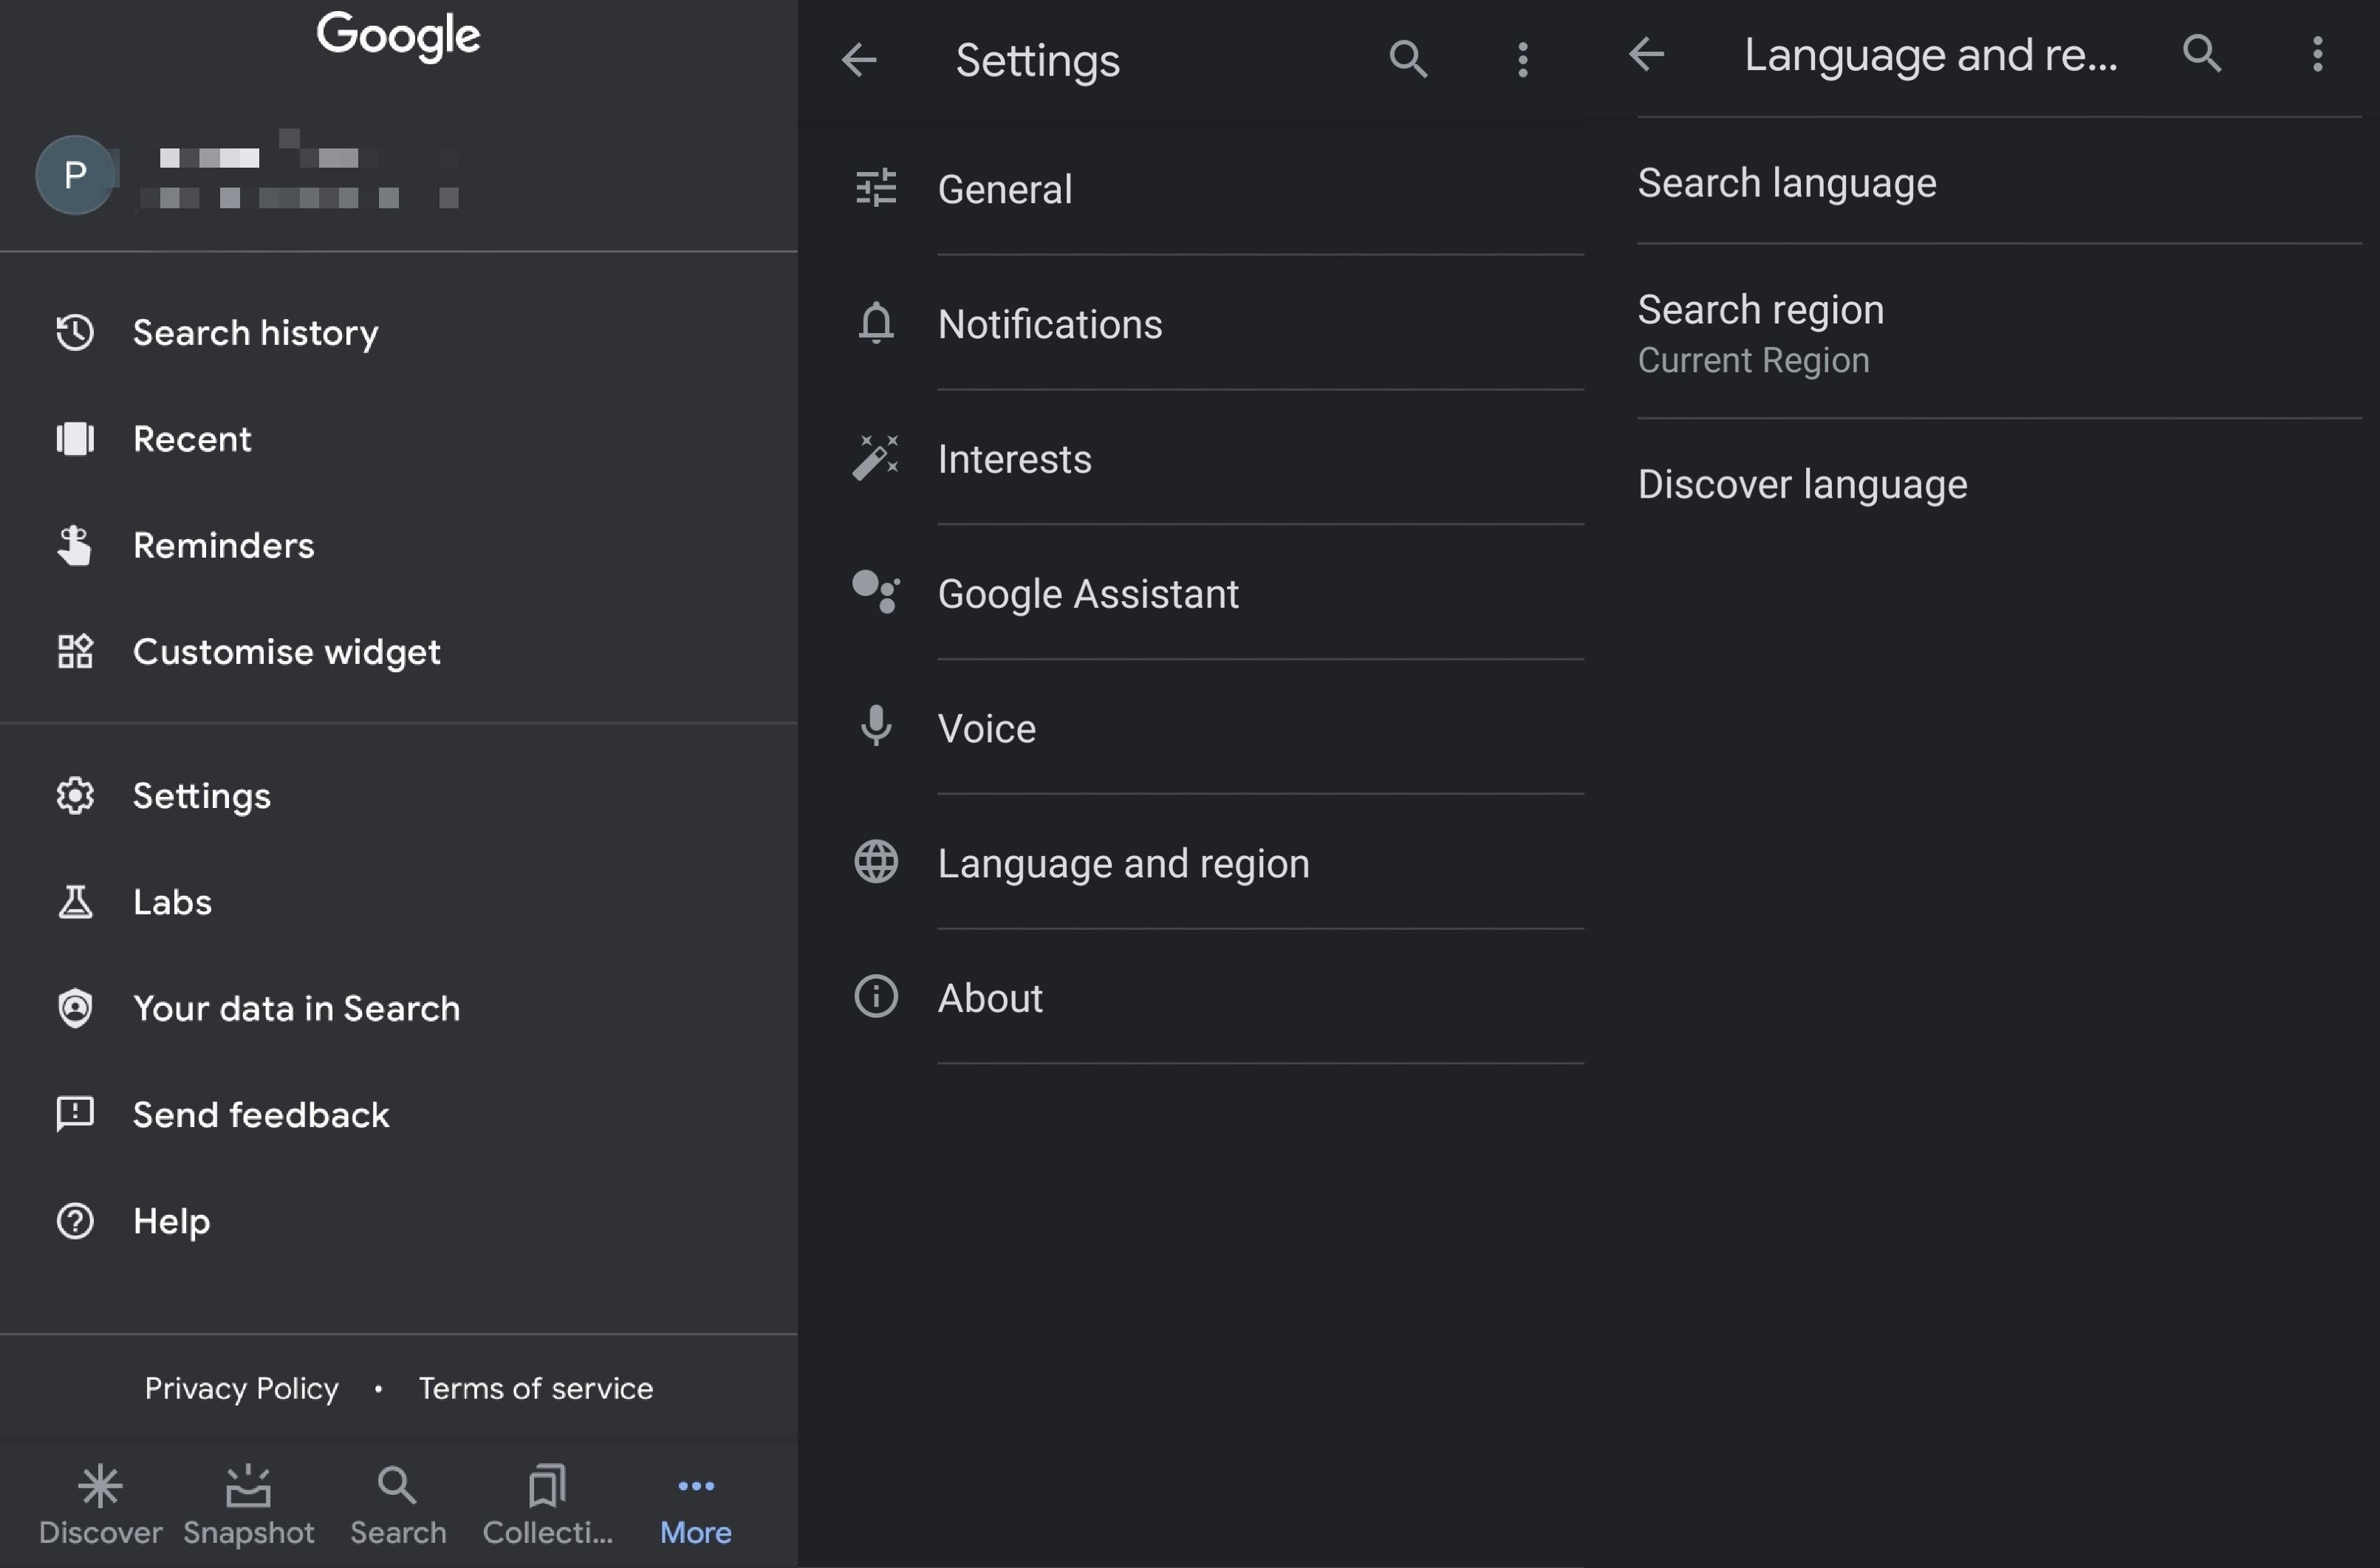 How To Change Language In Google Search Bar